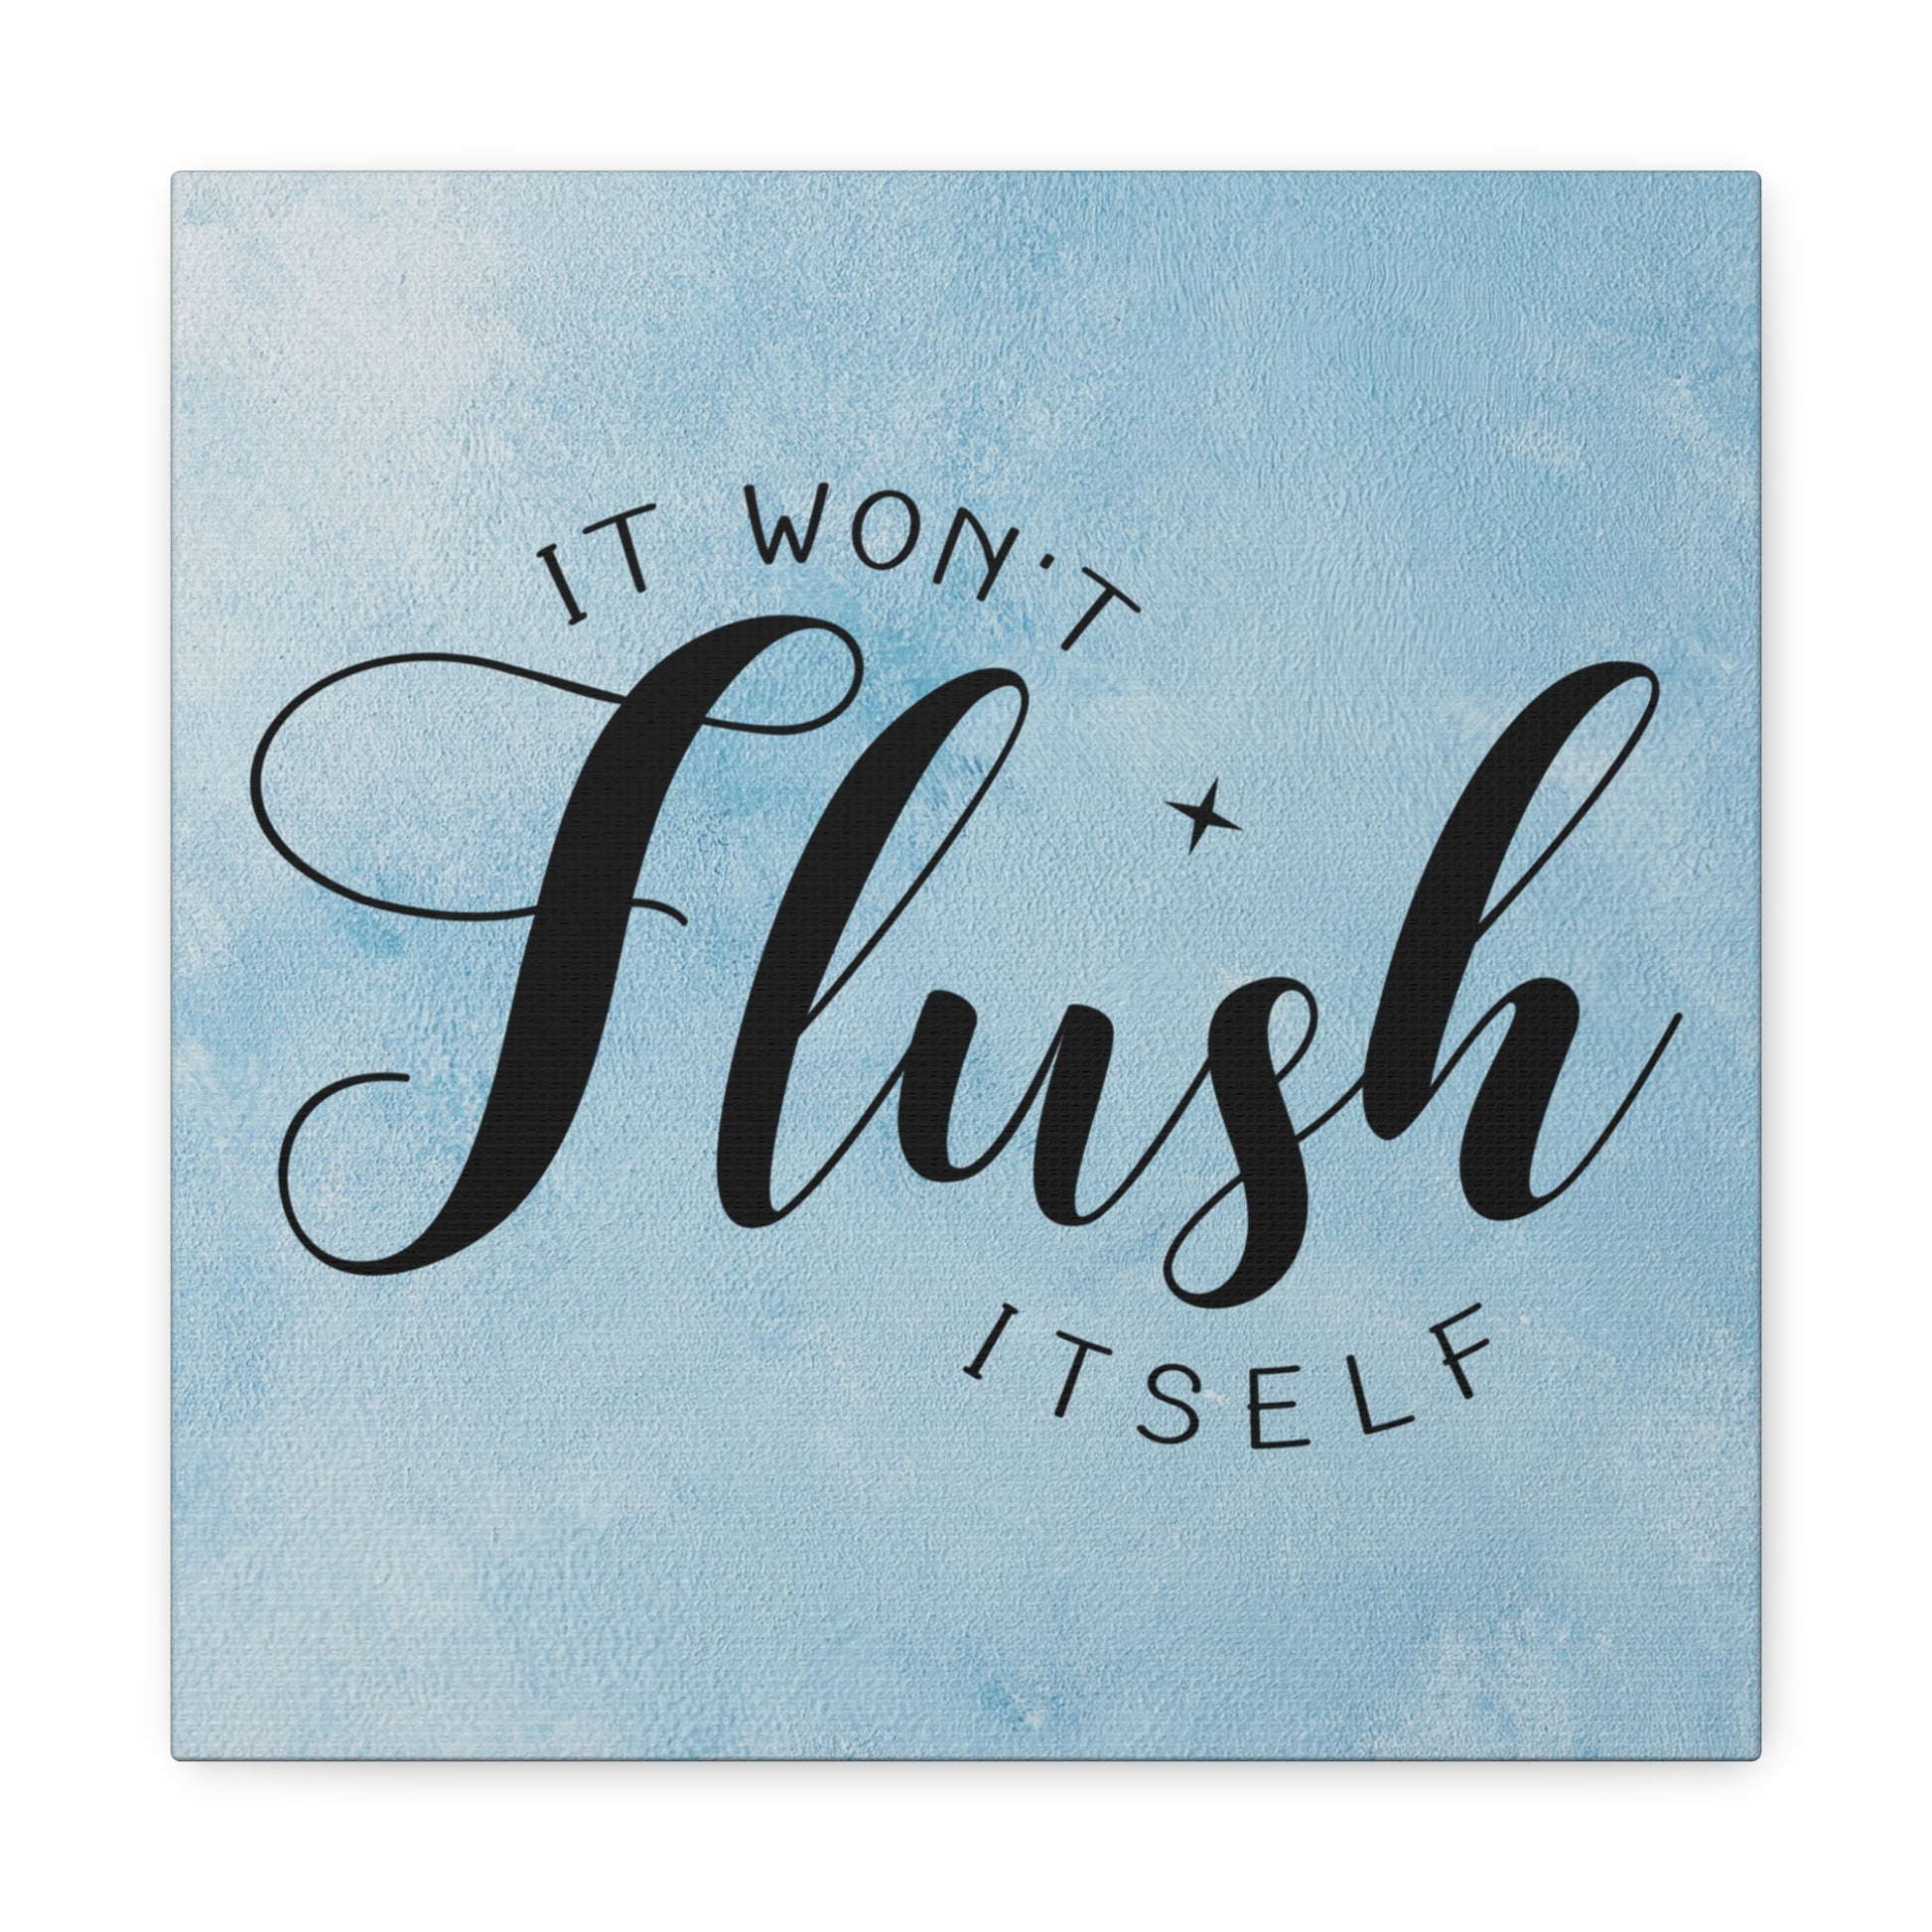 "It Won't Flush Itself" Wall Art - Weave Got Gifts - Unique Gifts You Won’t Find Anywhere Else!